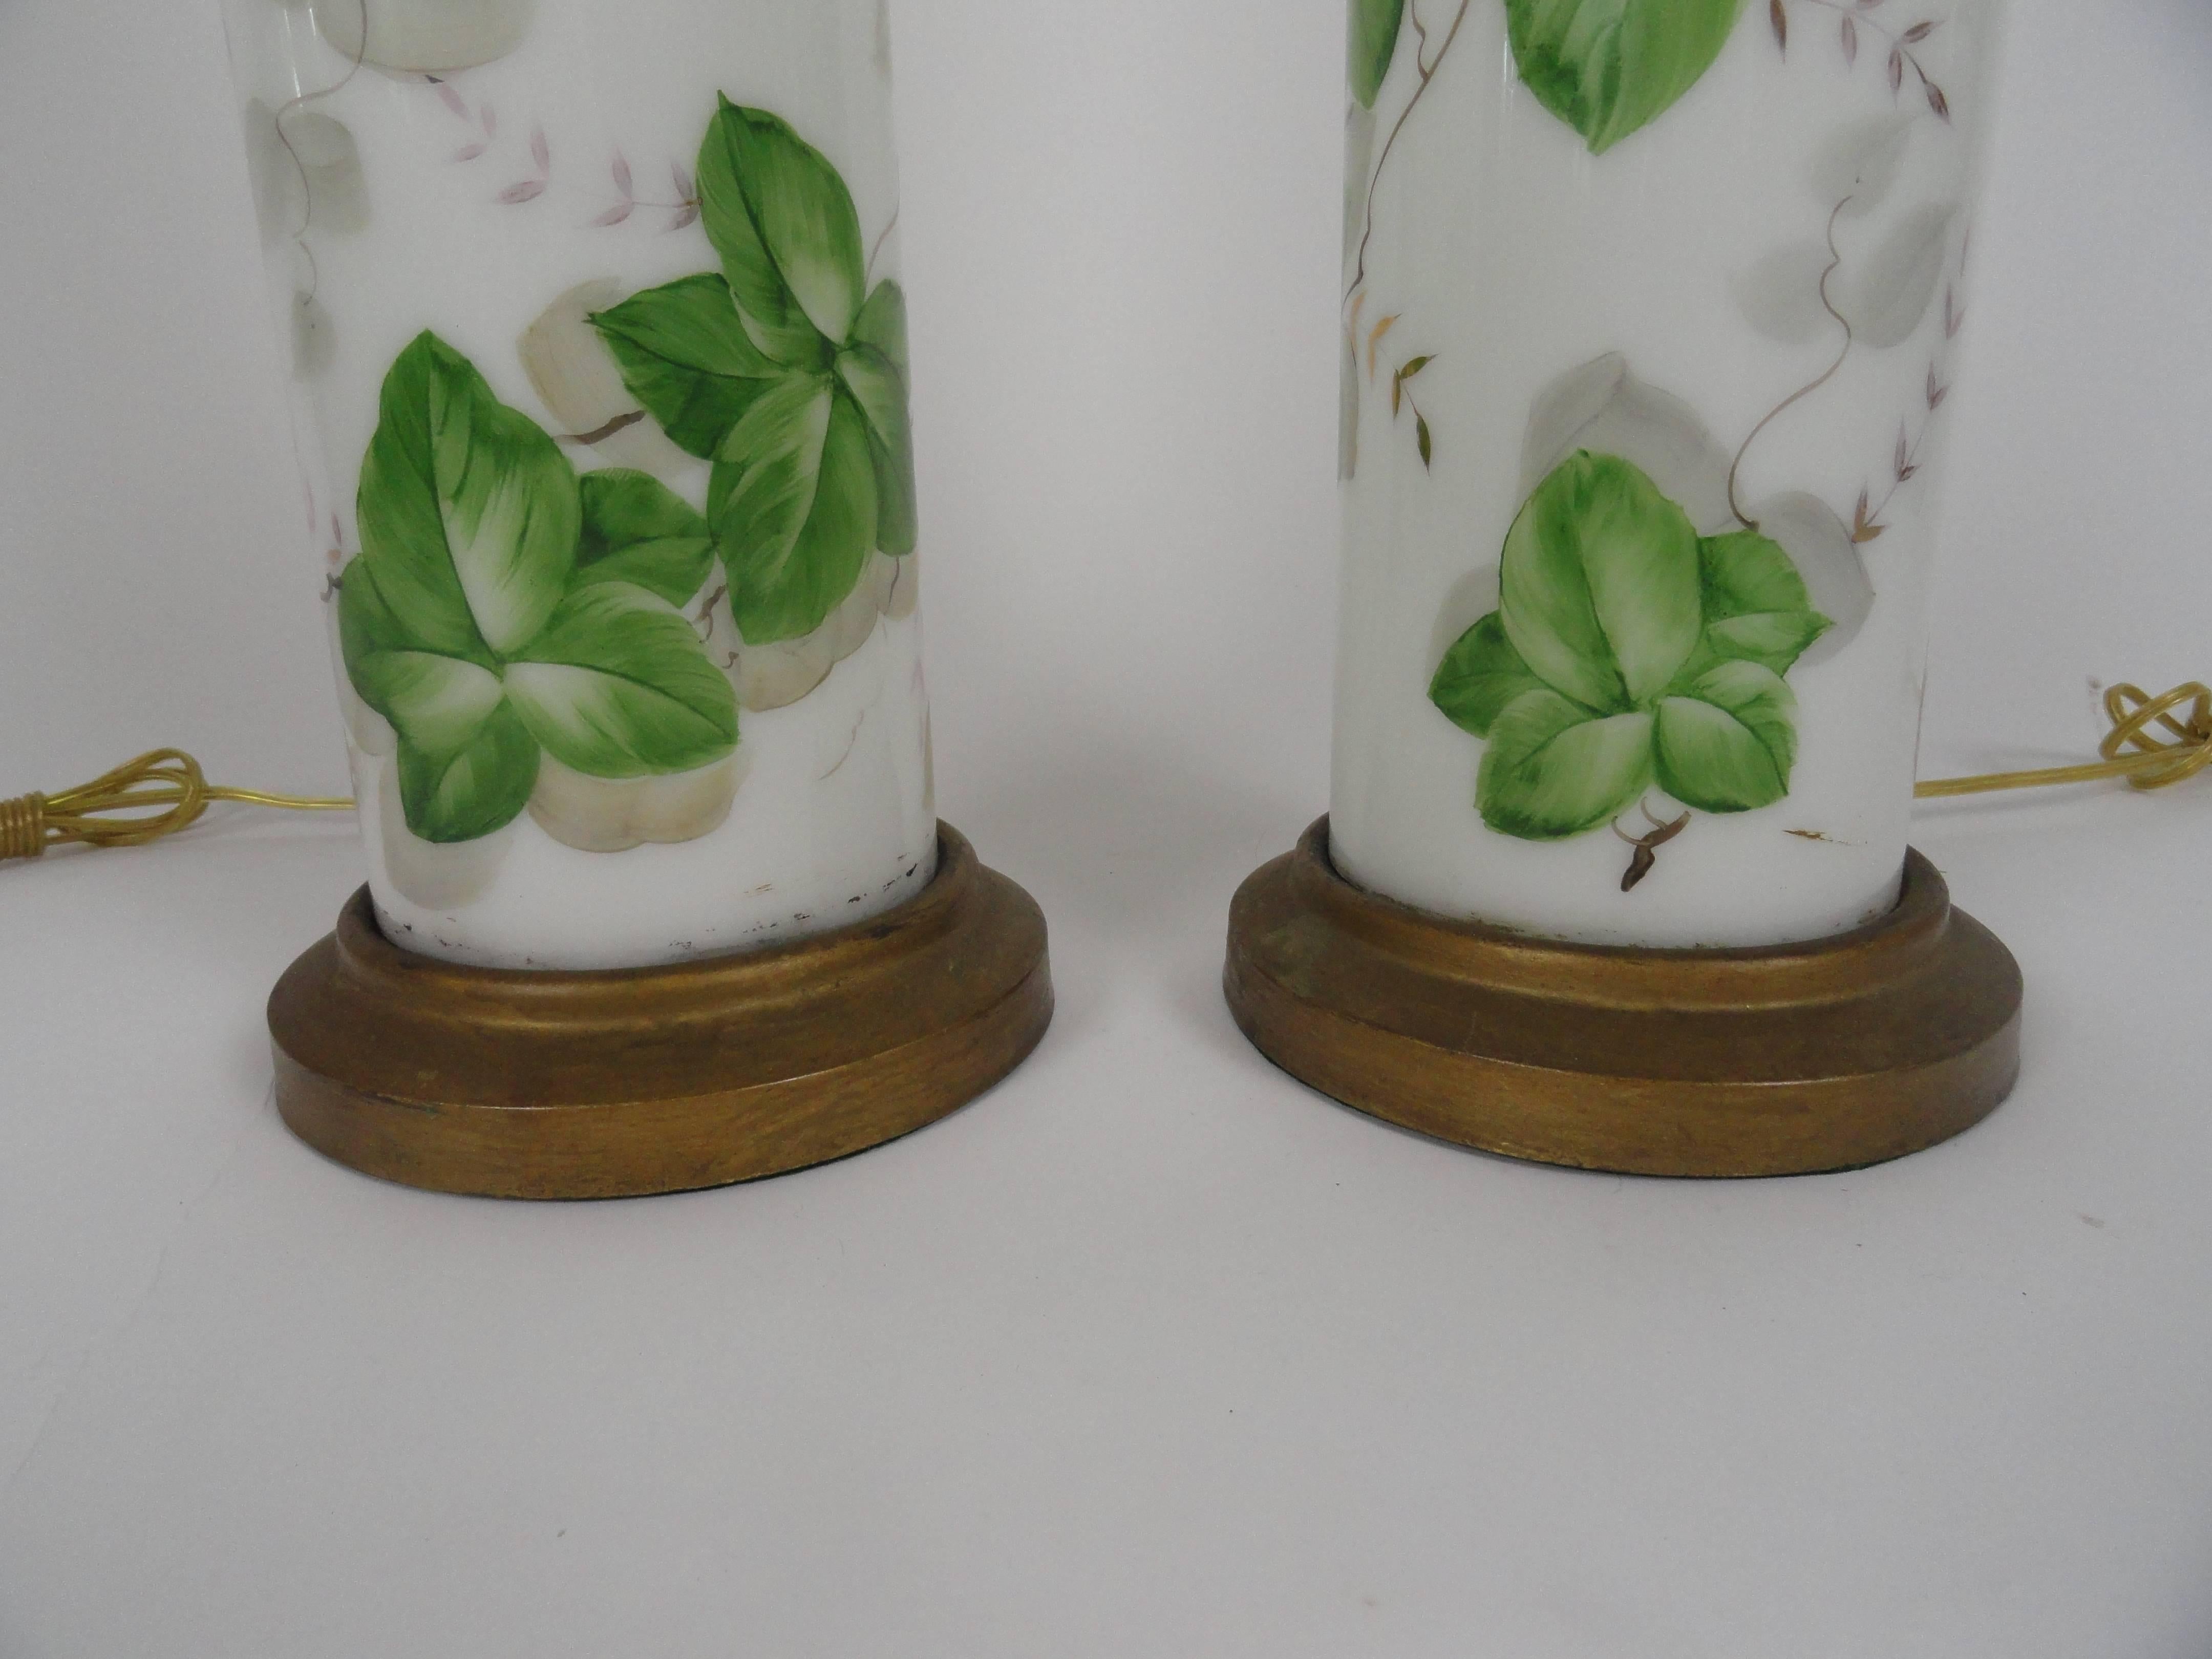 Pair of large-scale American made white glass lamps with hand-painted foliage in shades of green. Metal bases. Rewired with inline switches.